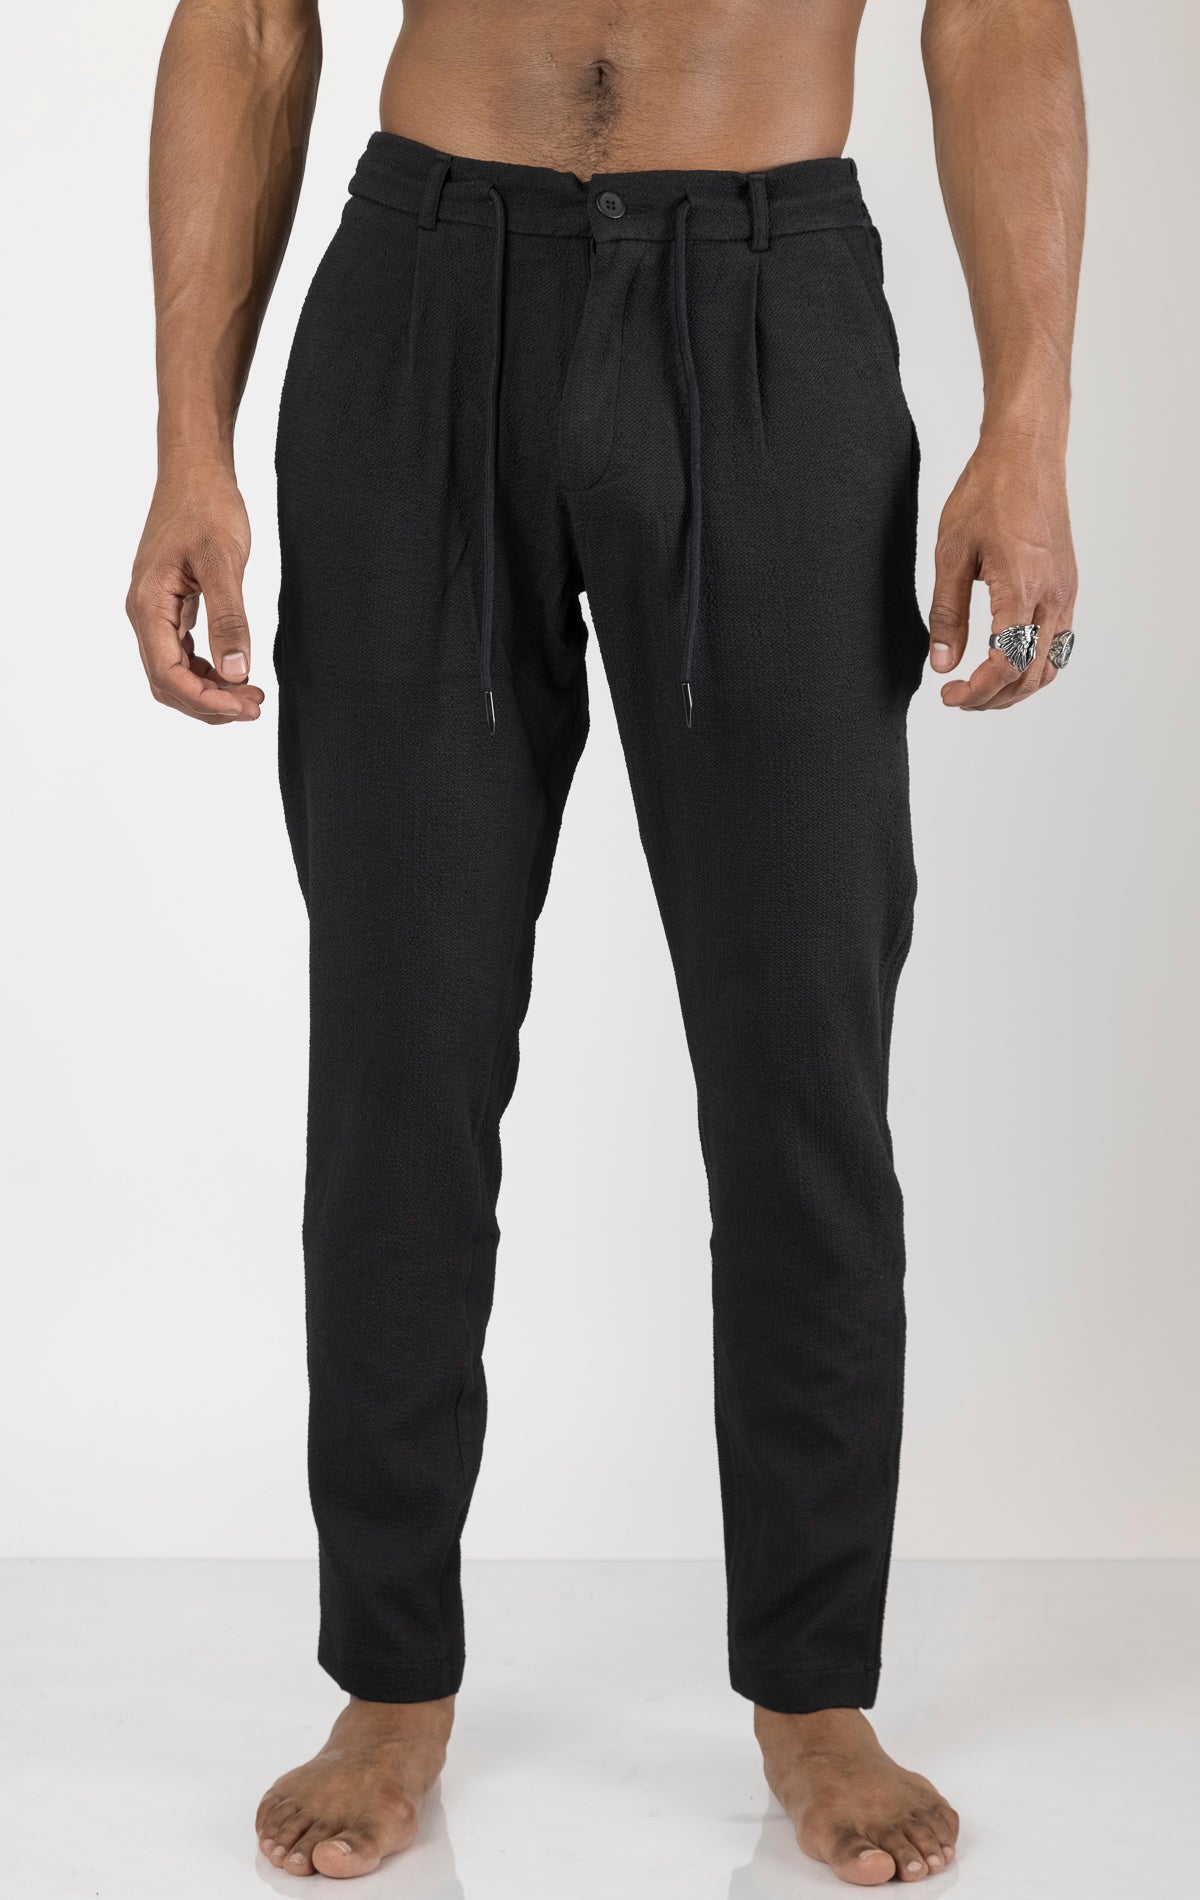 Men's front pleated waffle pants in black. The pants are made from a textured waffle fabric (95% cotton, 5% elastane) and feature a relaxed fit, front pleats, and a comfortable elastic waistband.